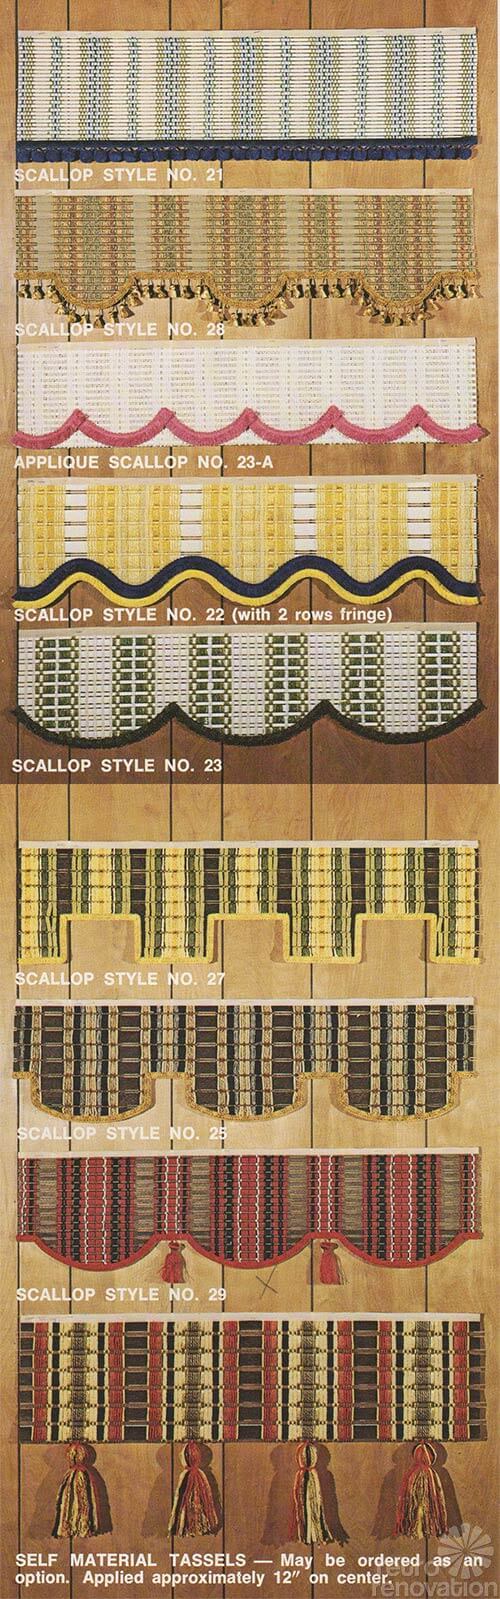 woven wood blinds